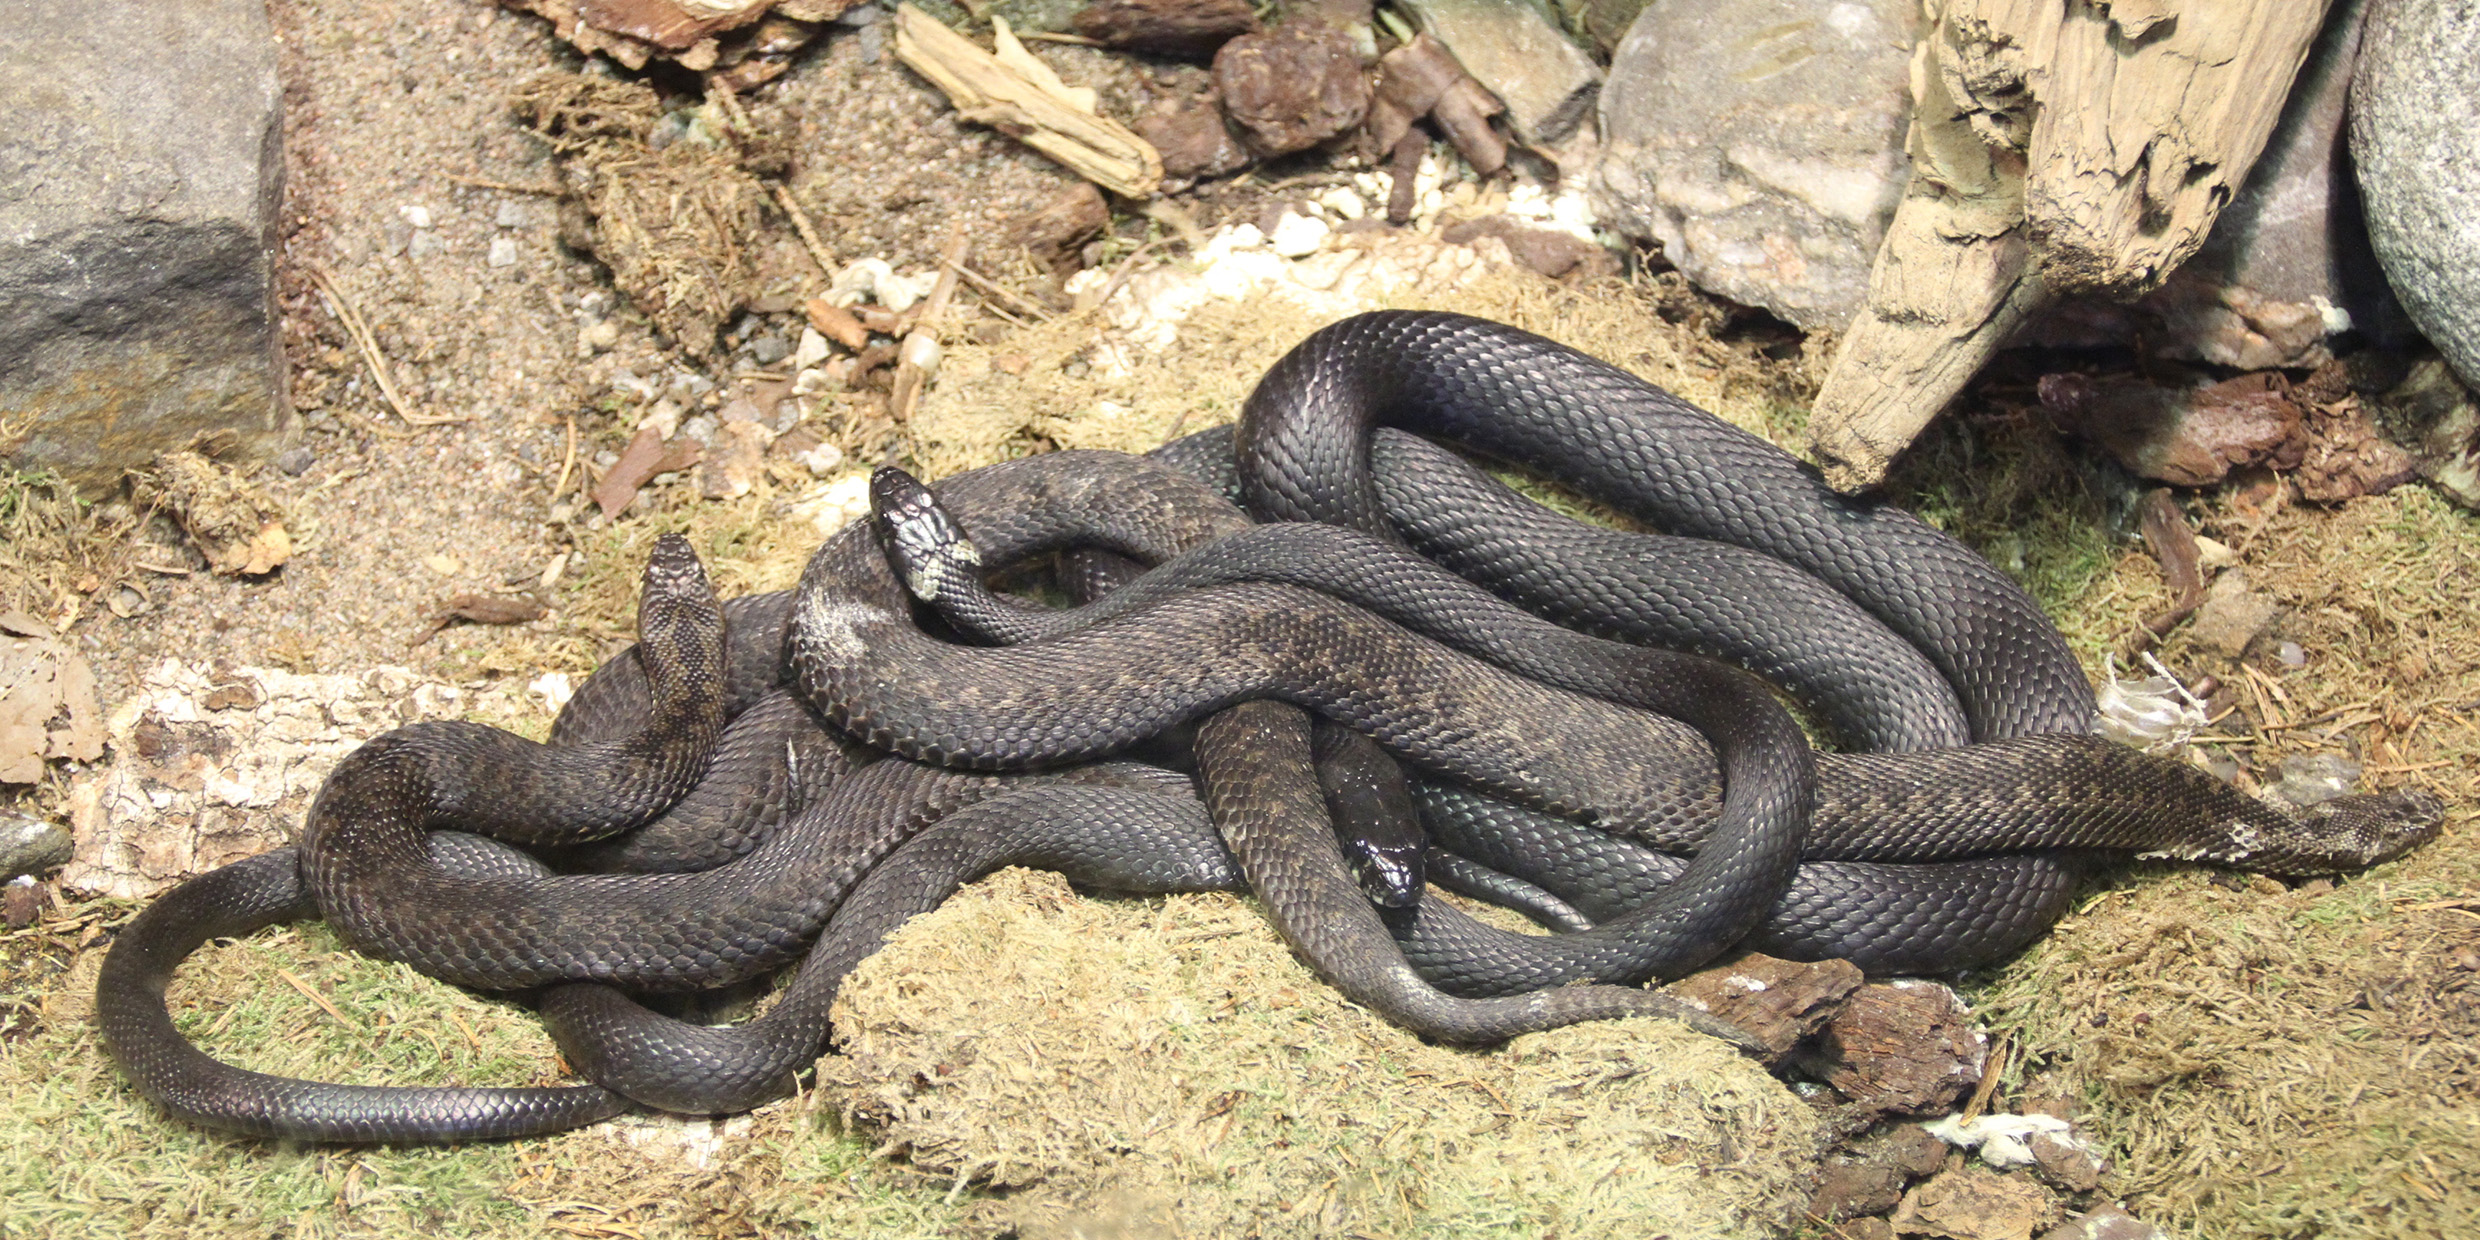 Image of a tangle of snakes